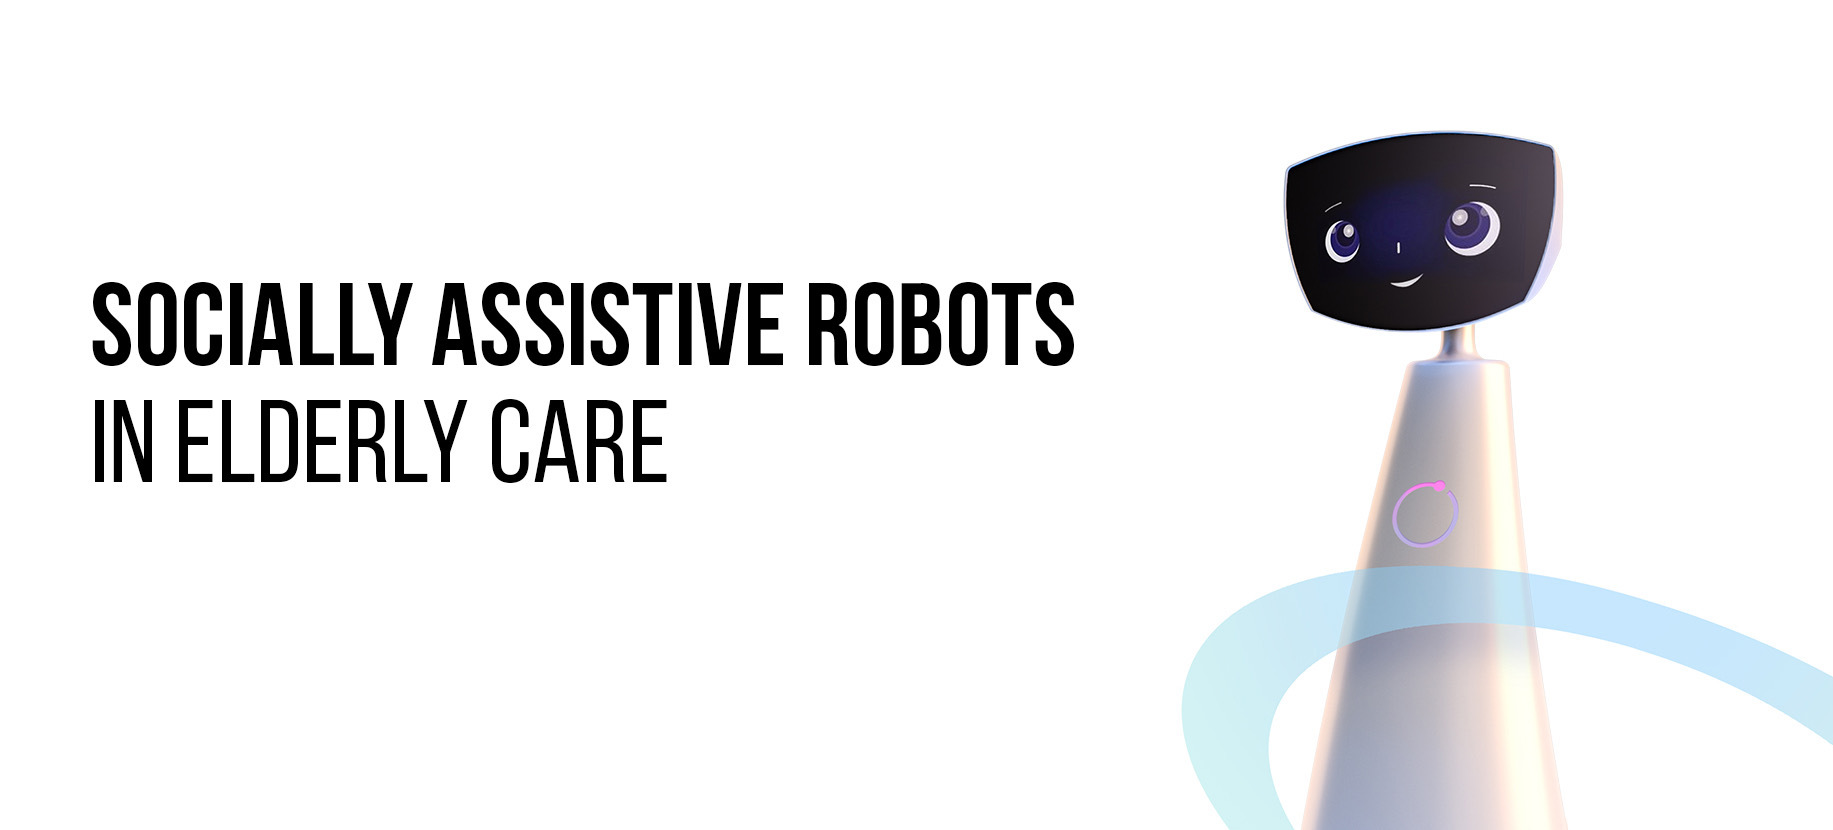 Expper Technologies secures $2M seed round to bring next-gen caregiver robots